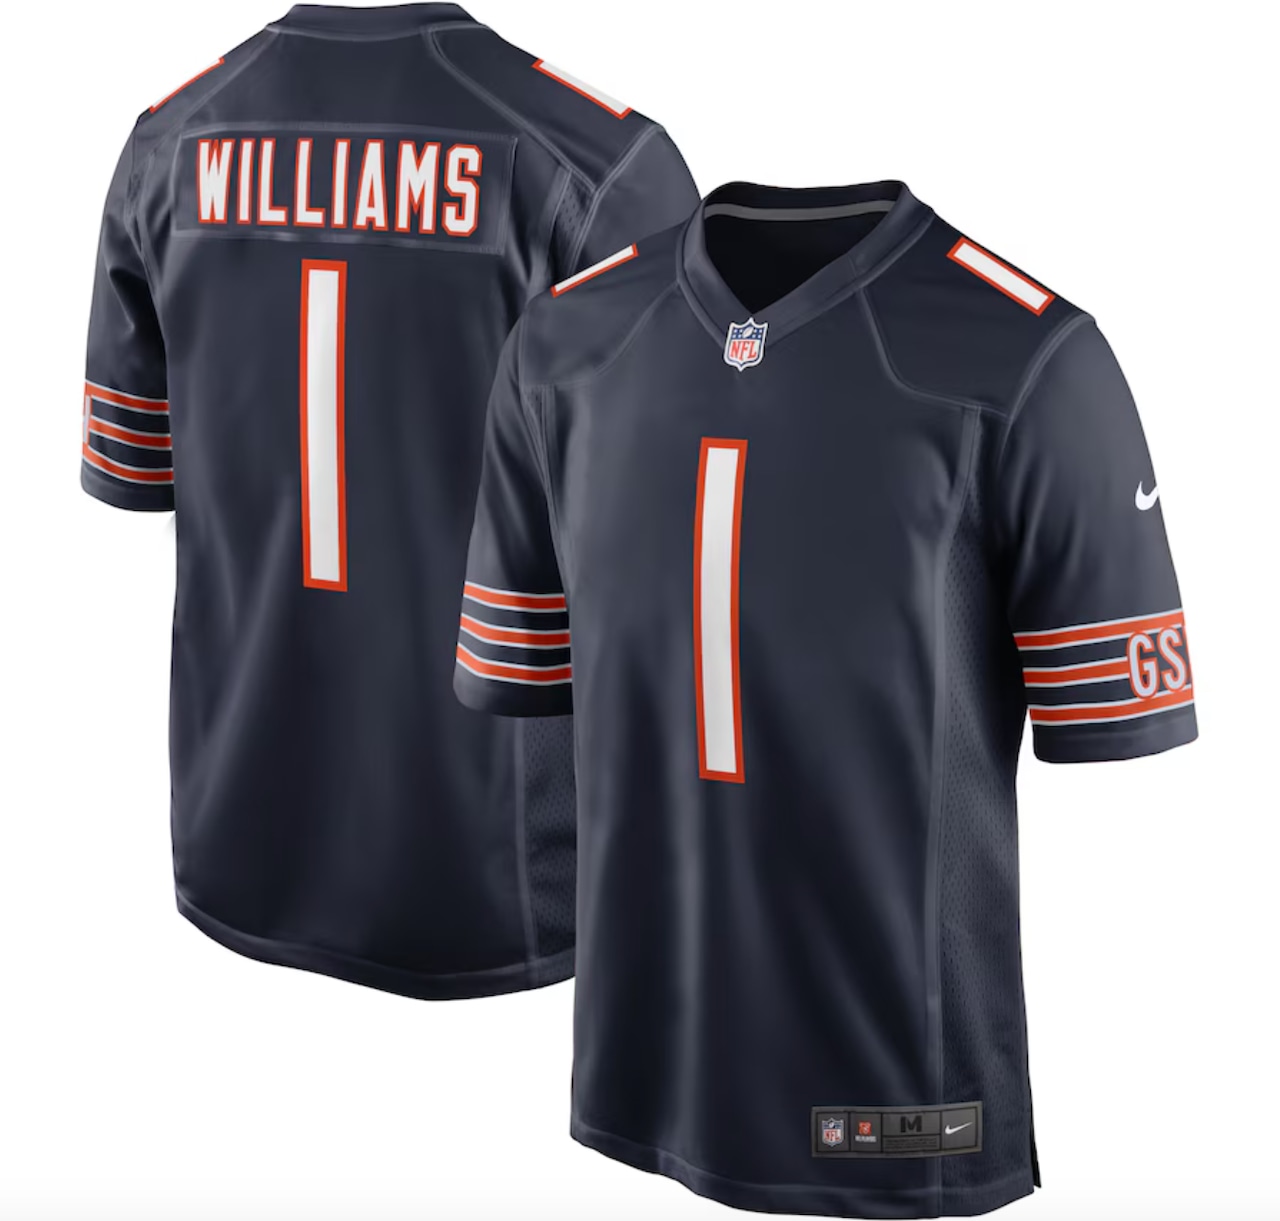 Fanatics just dropped Caleb Williams jersey for the Chicago Bears, and it ships FREE [Video]